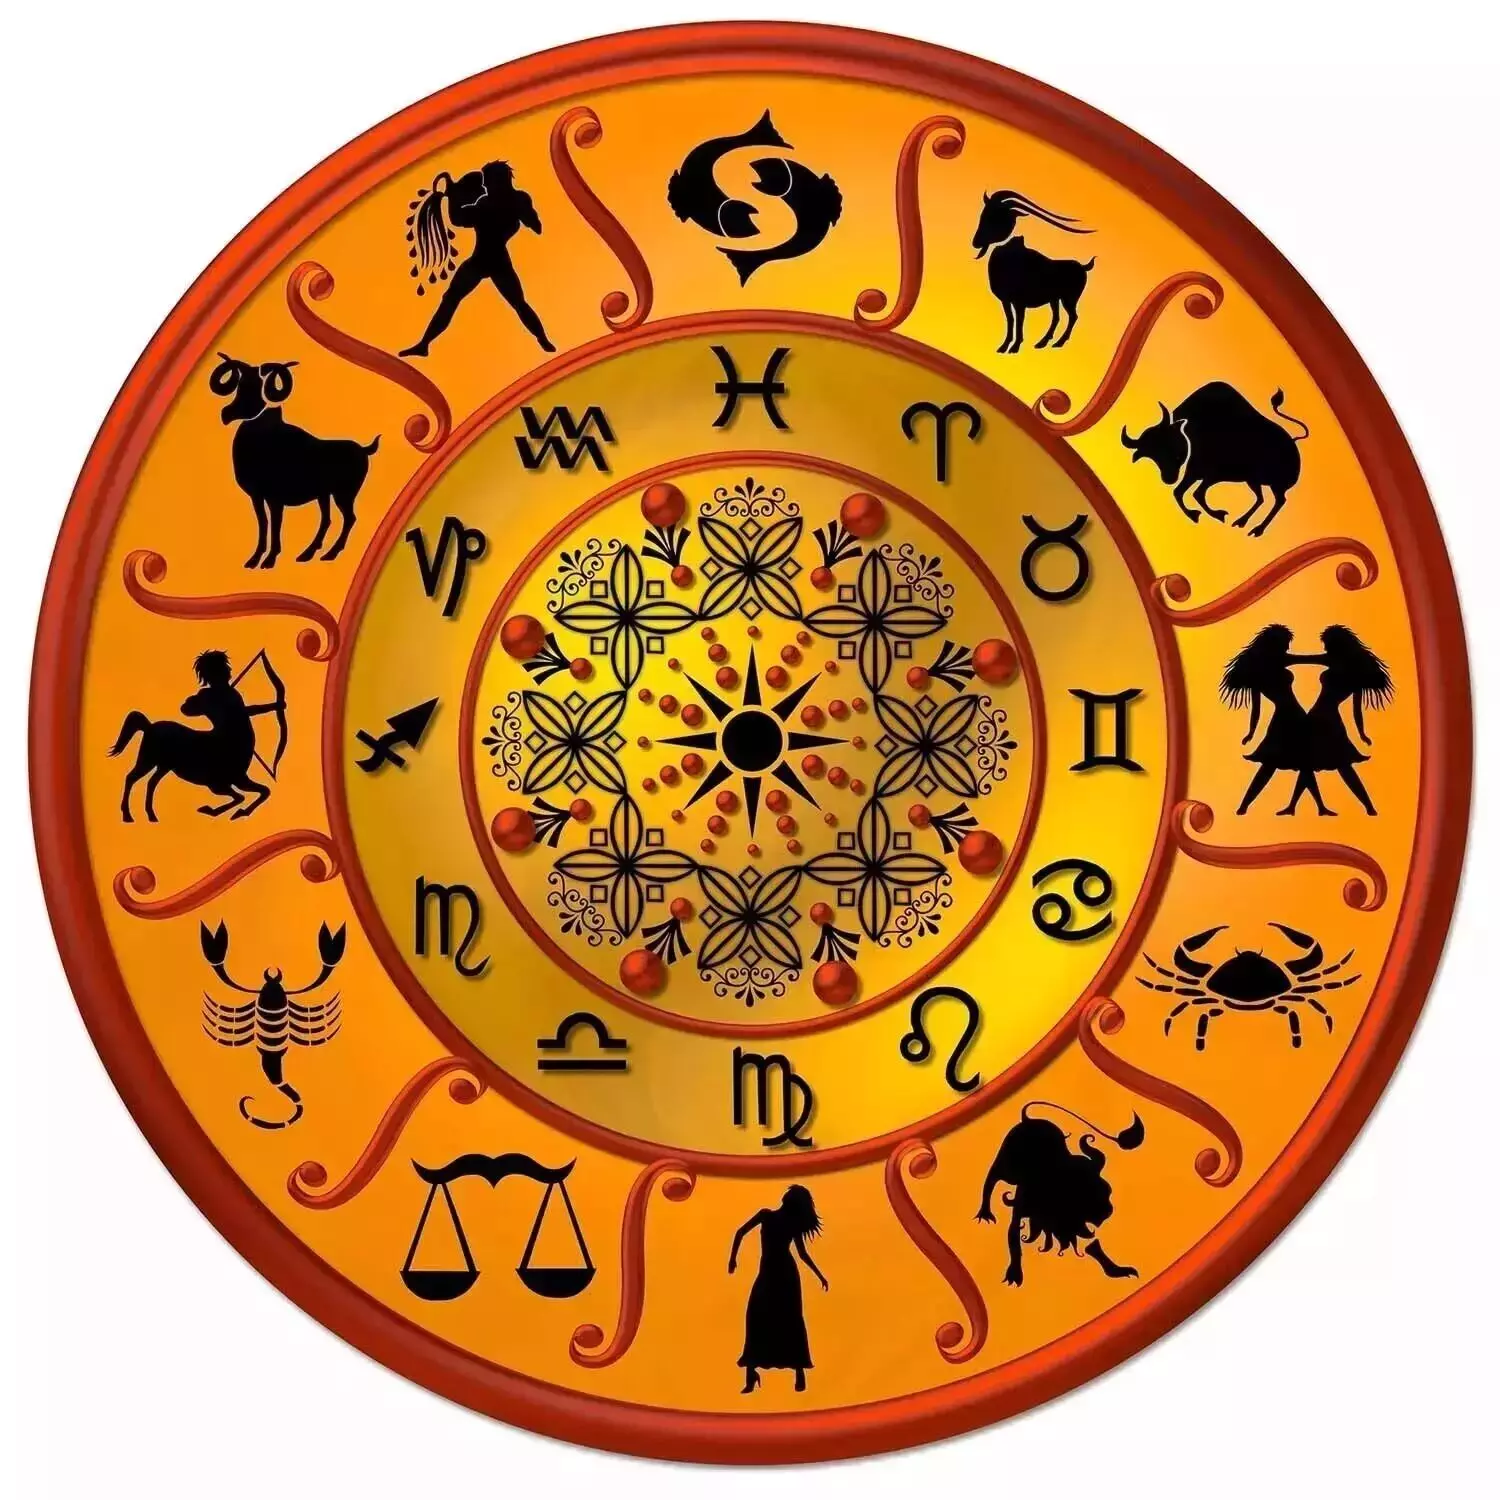 31  March  – Know your todays horoscope